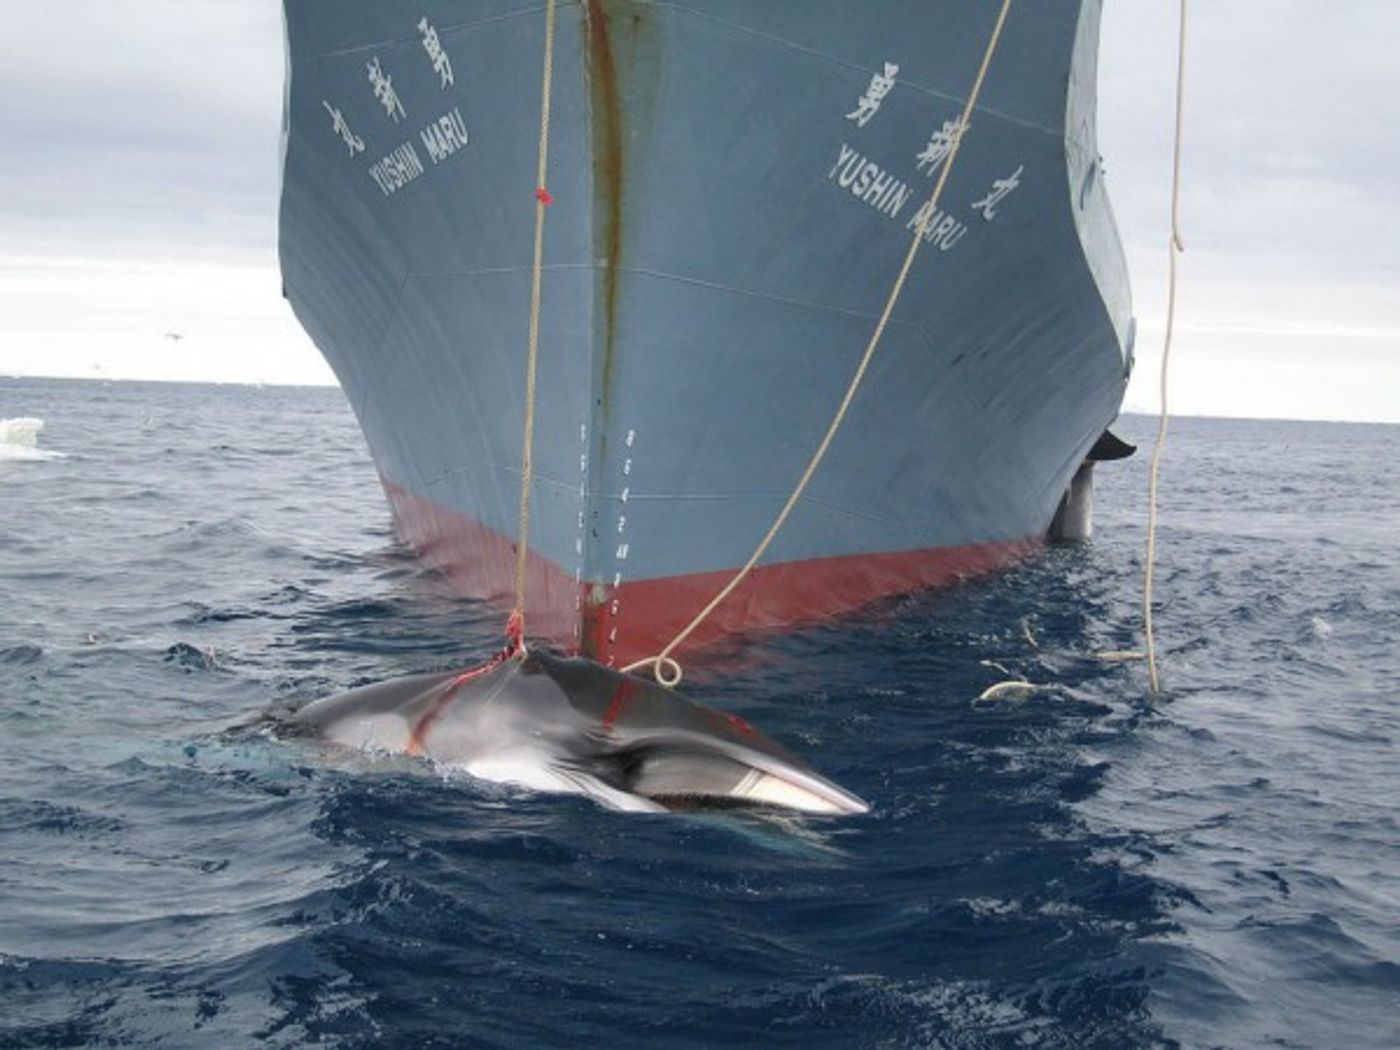 Japan will continue its whaling practices for "scientific research" this year